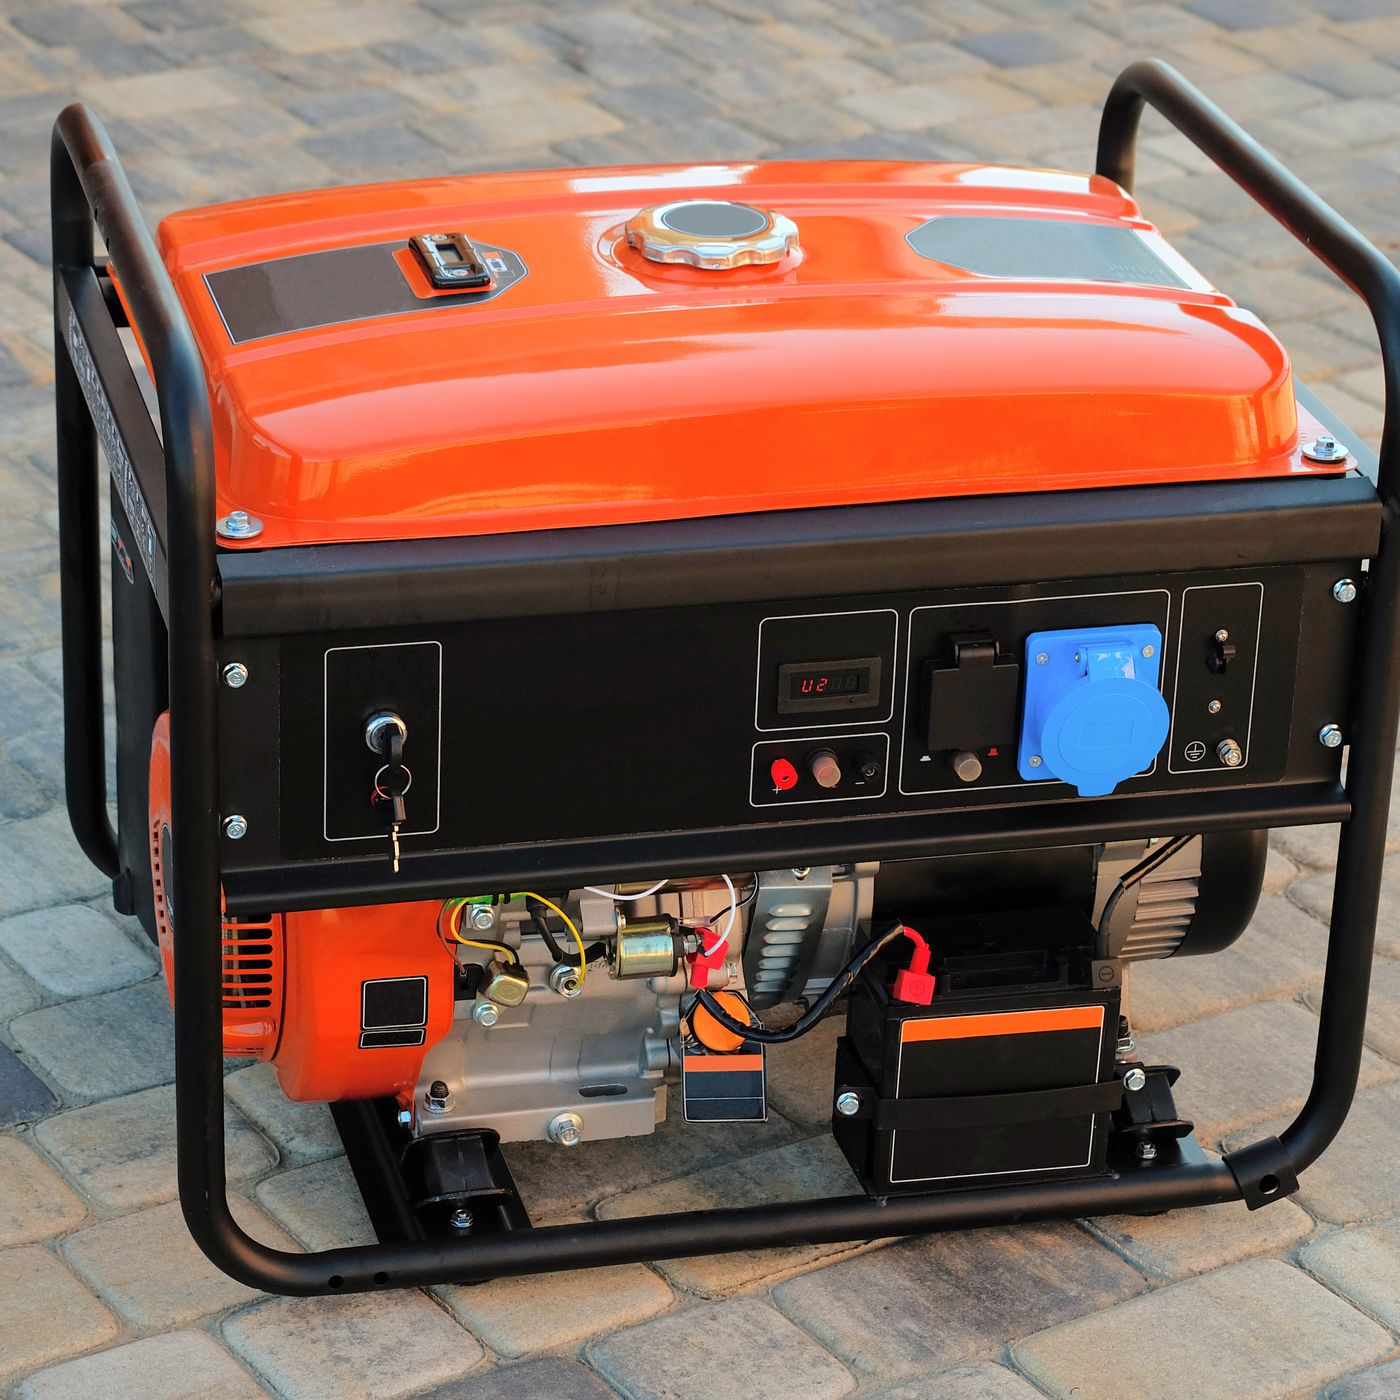 Factors To Consider When Buying An Inverter Generator